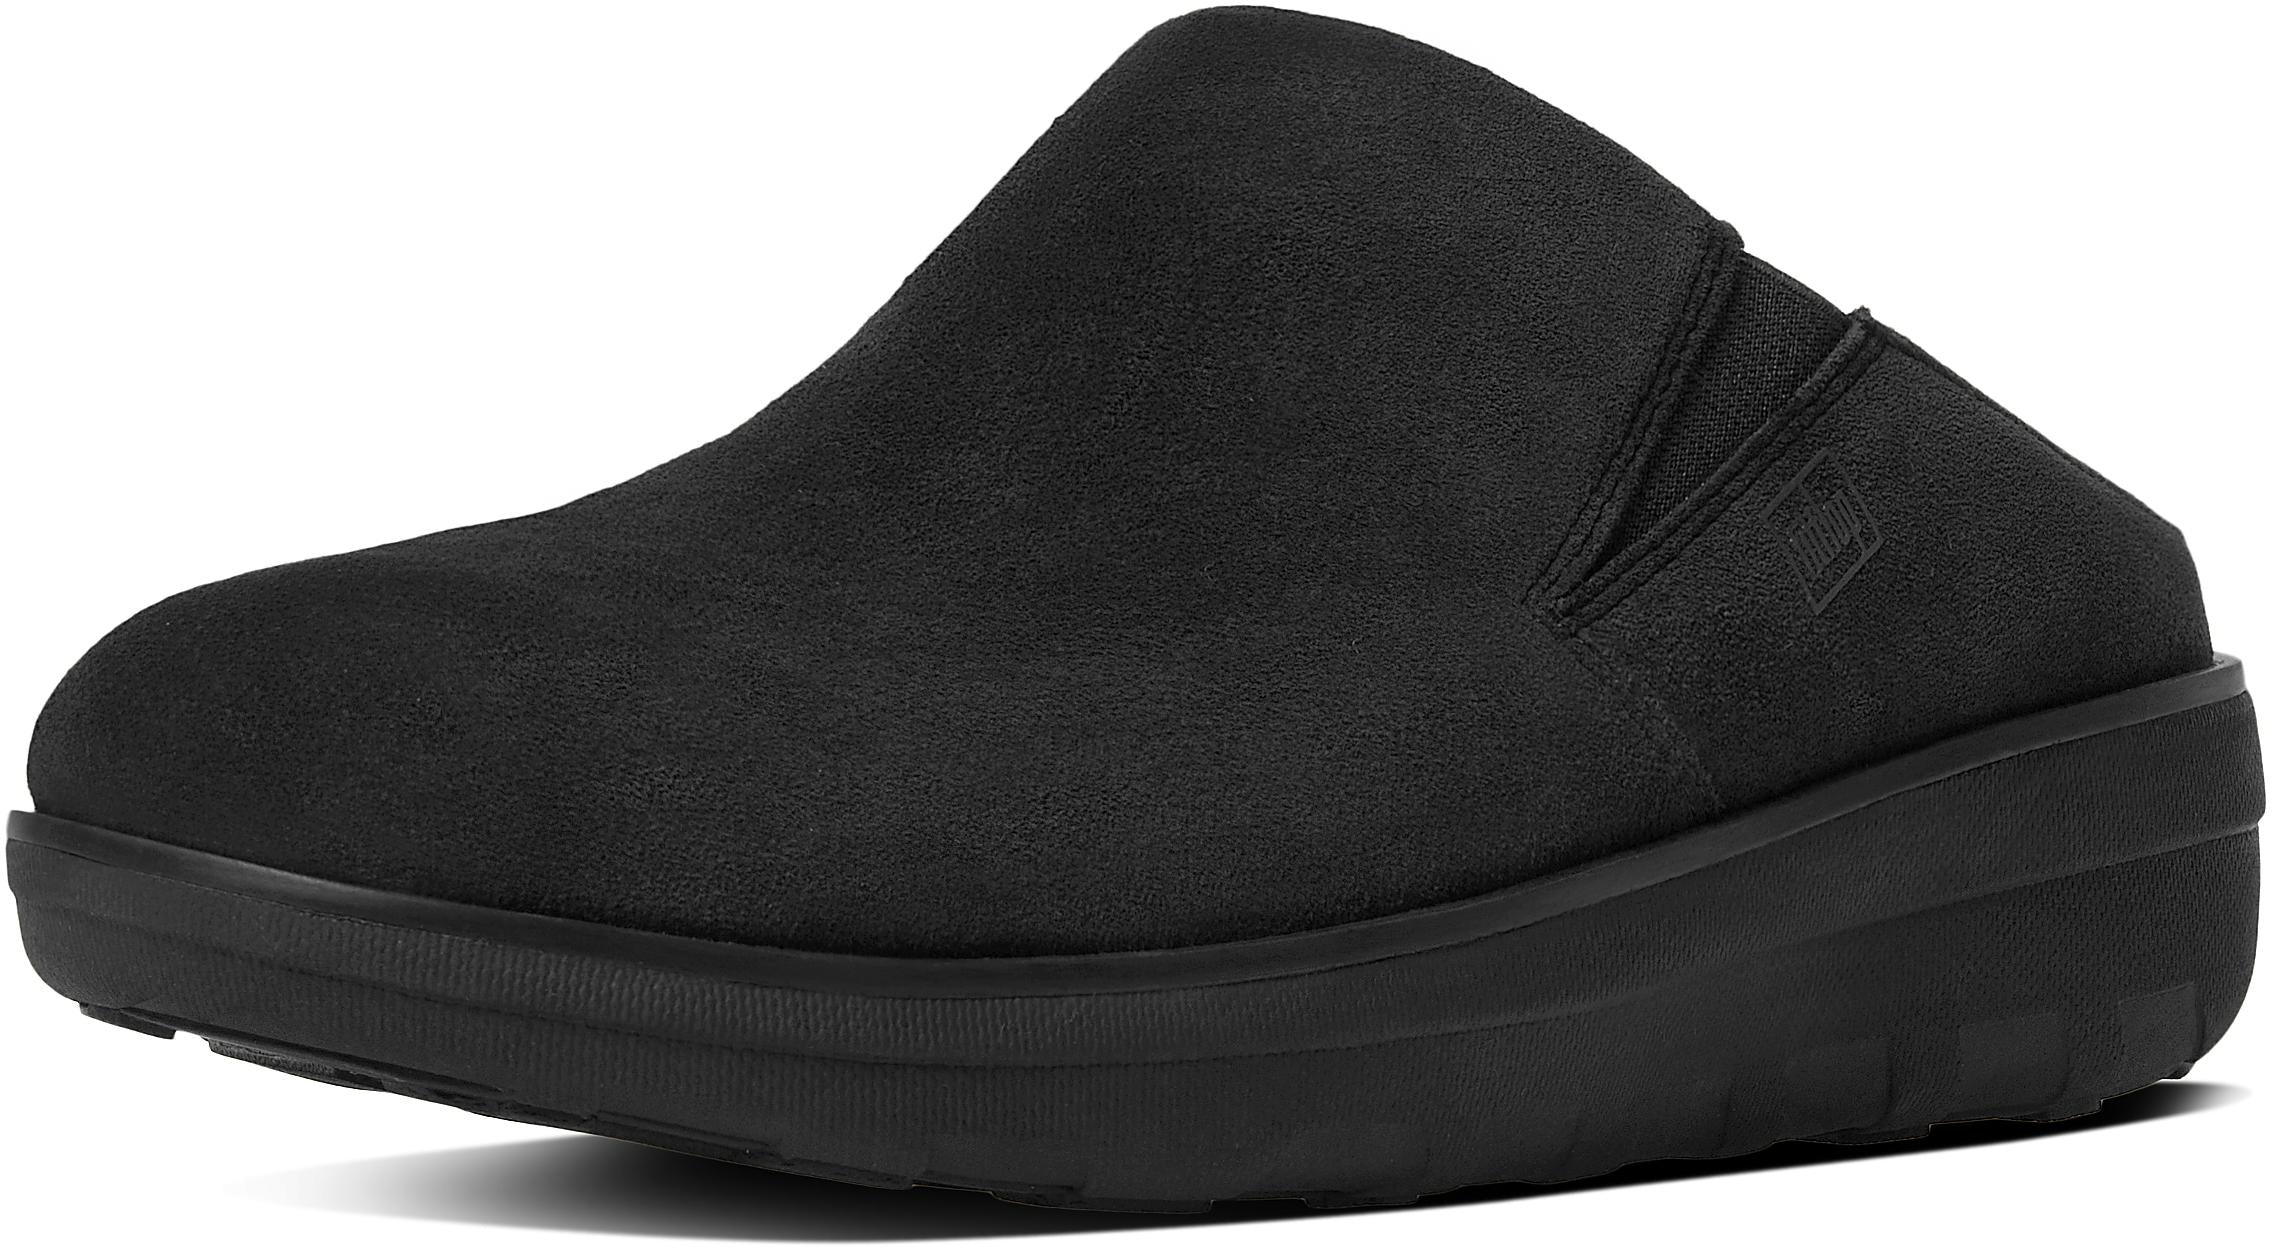 Loaff Suede Clogs in Black from the side